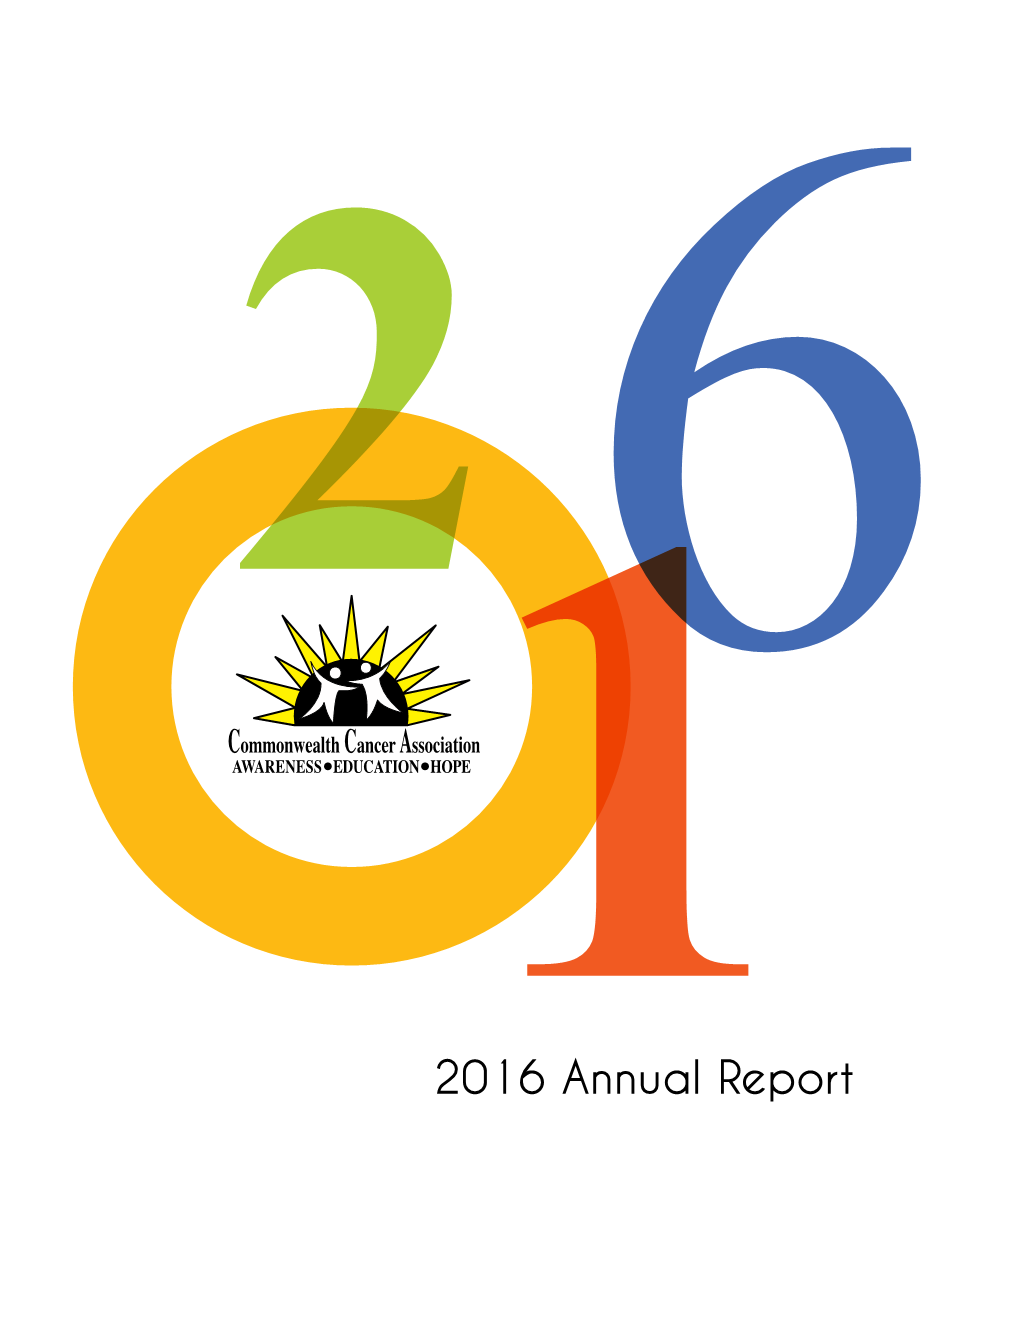 2016 Annual Report Highlighting the Programs, Services and Accomplishments of the Association